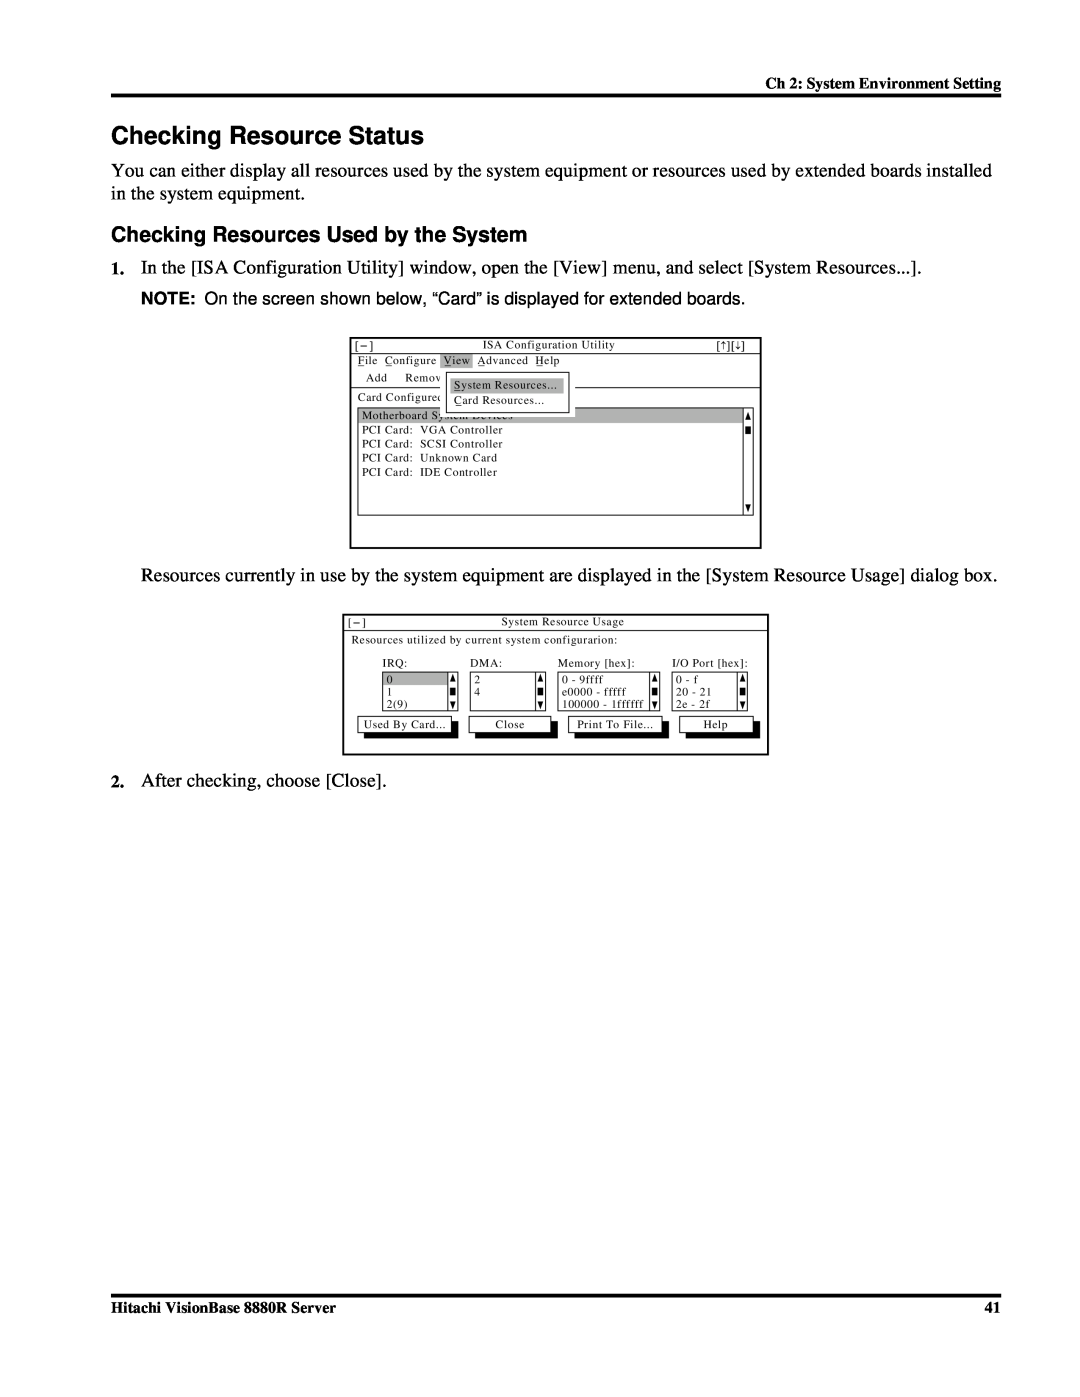 Hitachi 8880R manual Checking Resource Status, Checking Resources Used by the System 